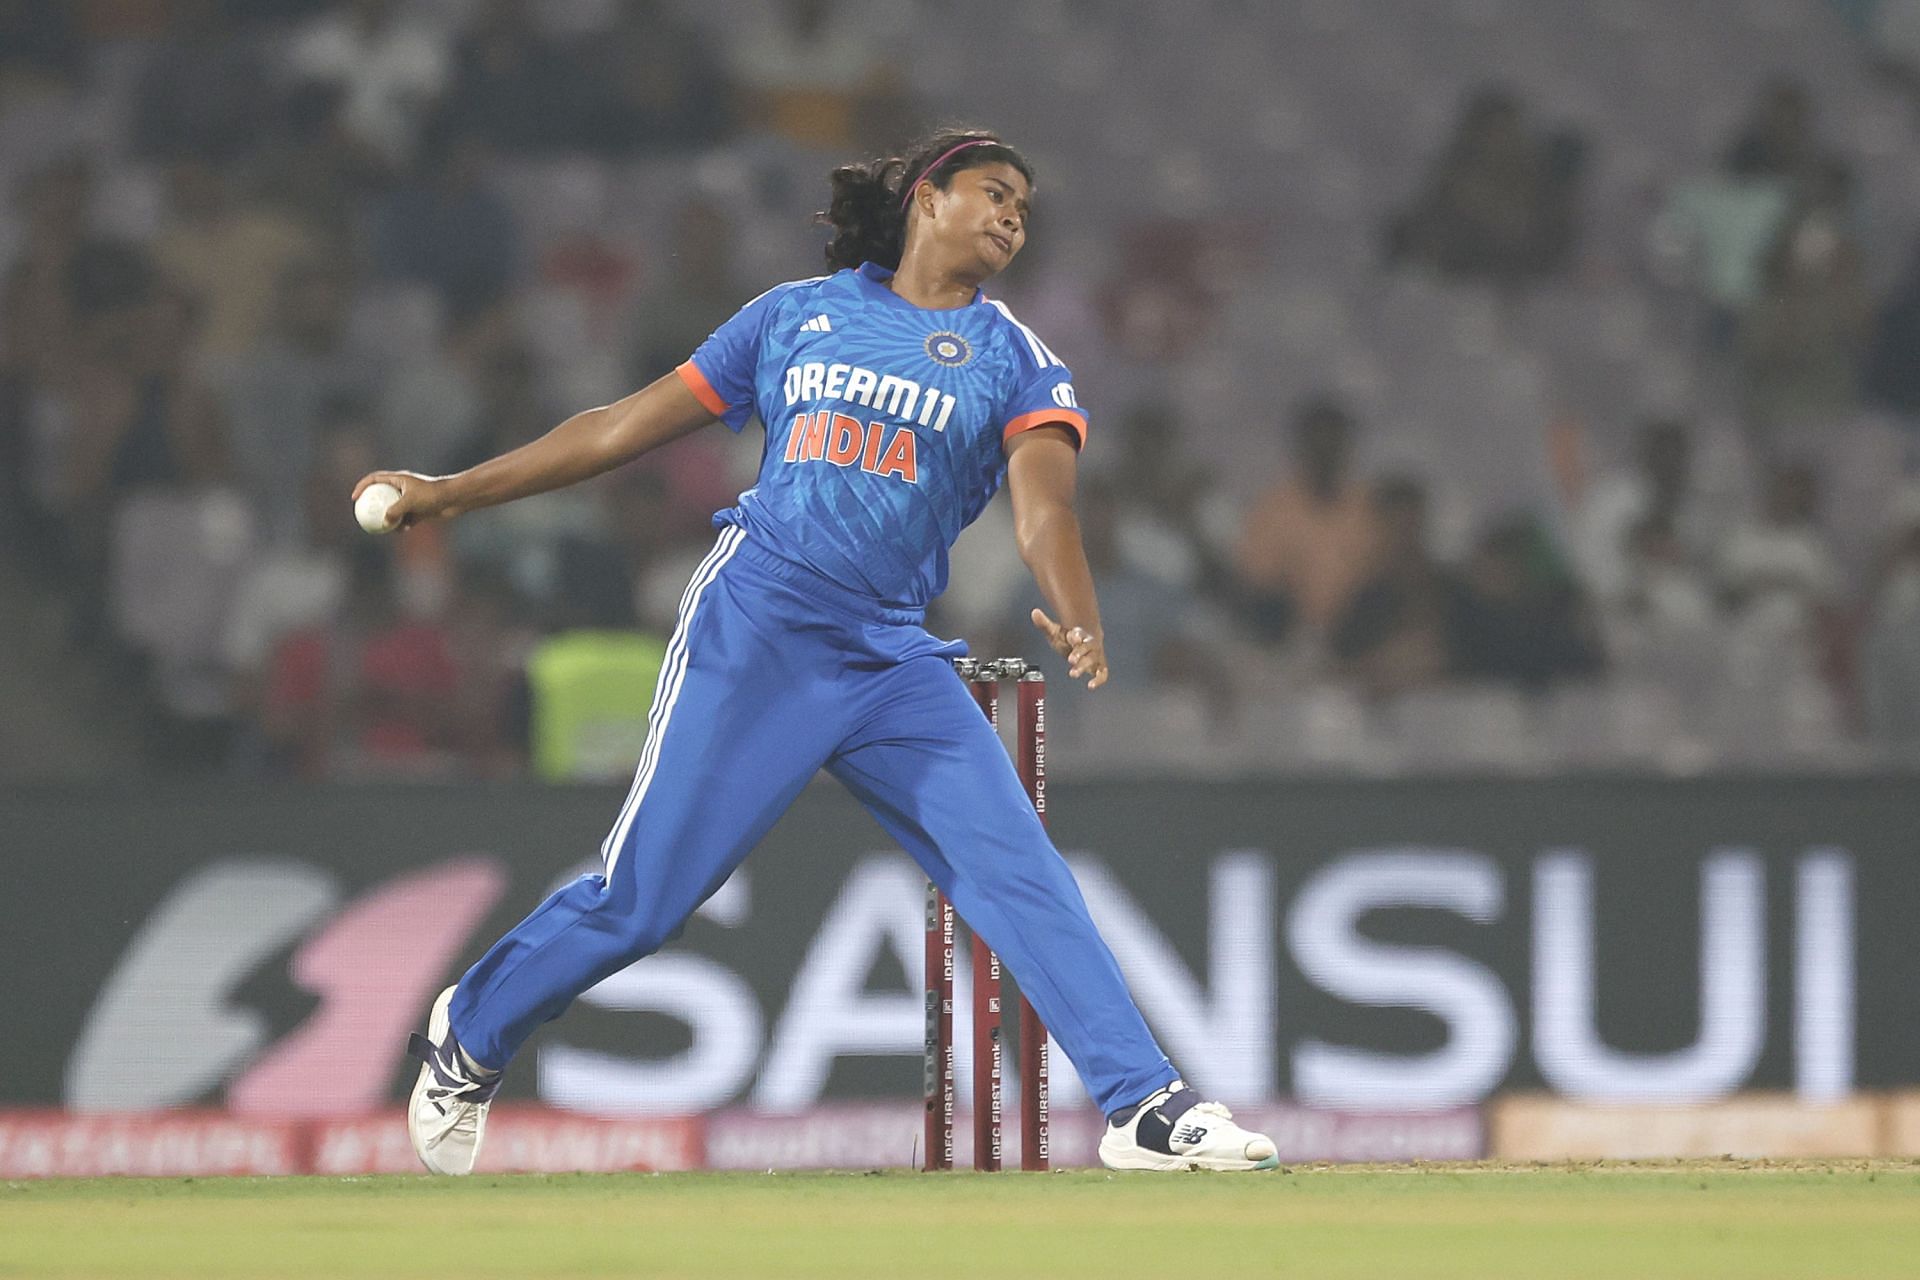 Titas Sadhu picked up three wickets in her first two overs. [P/C: Getty]